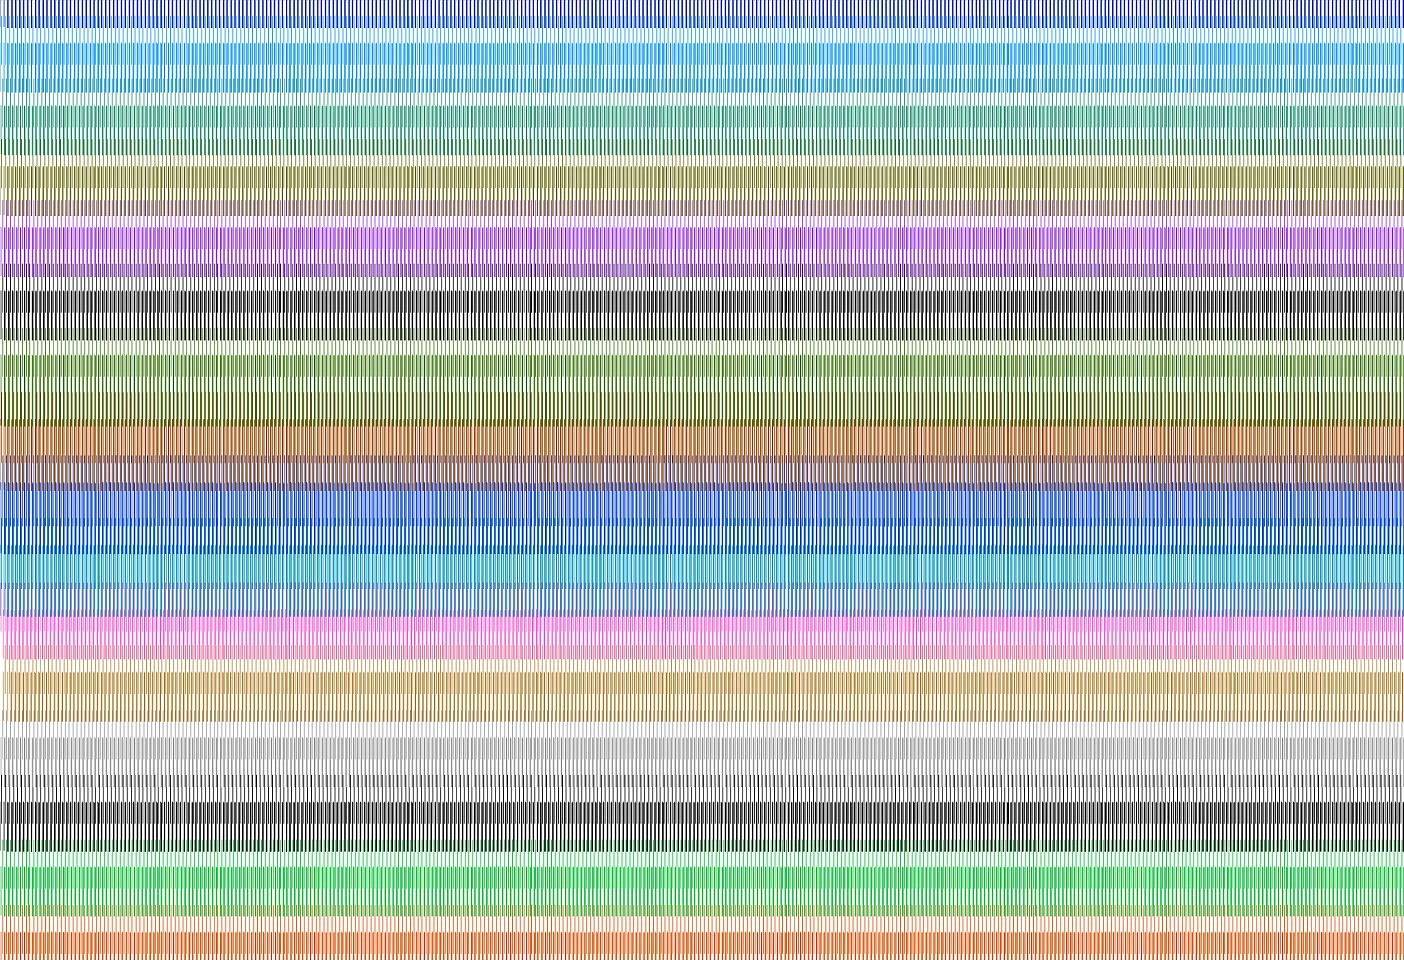 Dane Albert, Color Sticks #32, 2023
Acrylic on canvas (Concept), 48 x 72 in. (121.9 x 182.9 cm)
Series of colored lines and shapes in multiple configurations
DA.2023.sticks-032